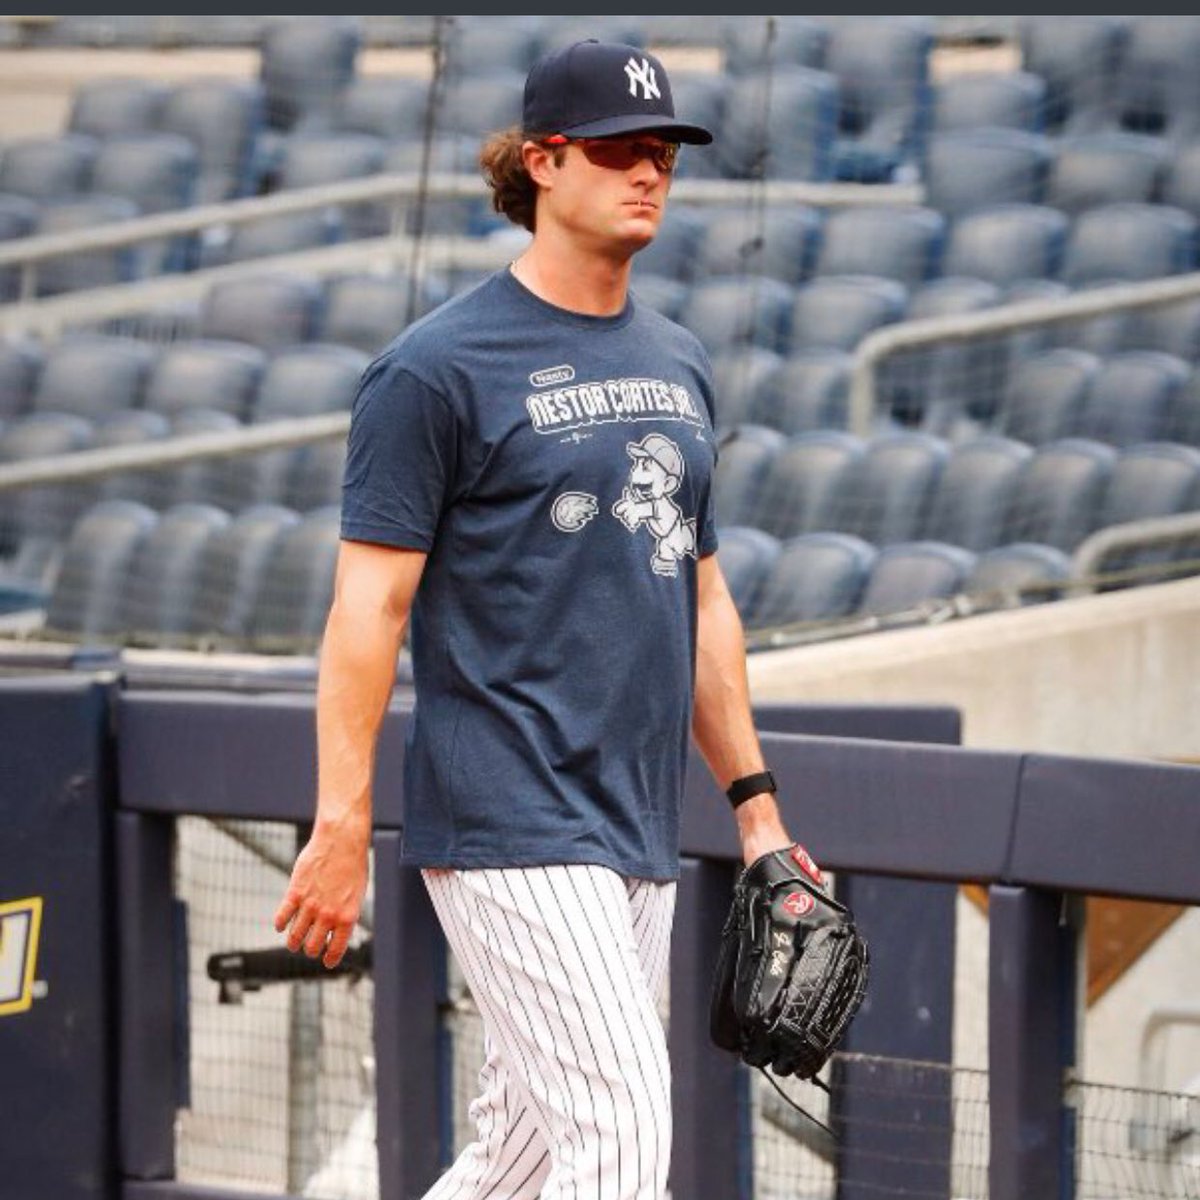 Despite Yankees win, Gerrit Cole is said to have been in a sour mood after being forced to wear Nestor Cortes’ RotoWear shirt.

“You ever wanna see a millionaire piss and moan, have him put on a better man’s t-shirt,” says a source close to the situation. https://t.co/LwVd8cLIgF